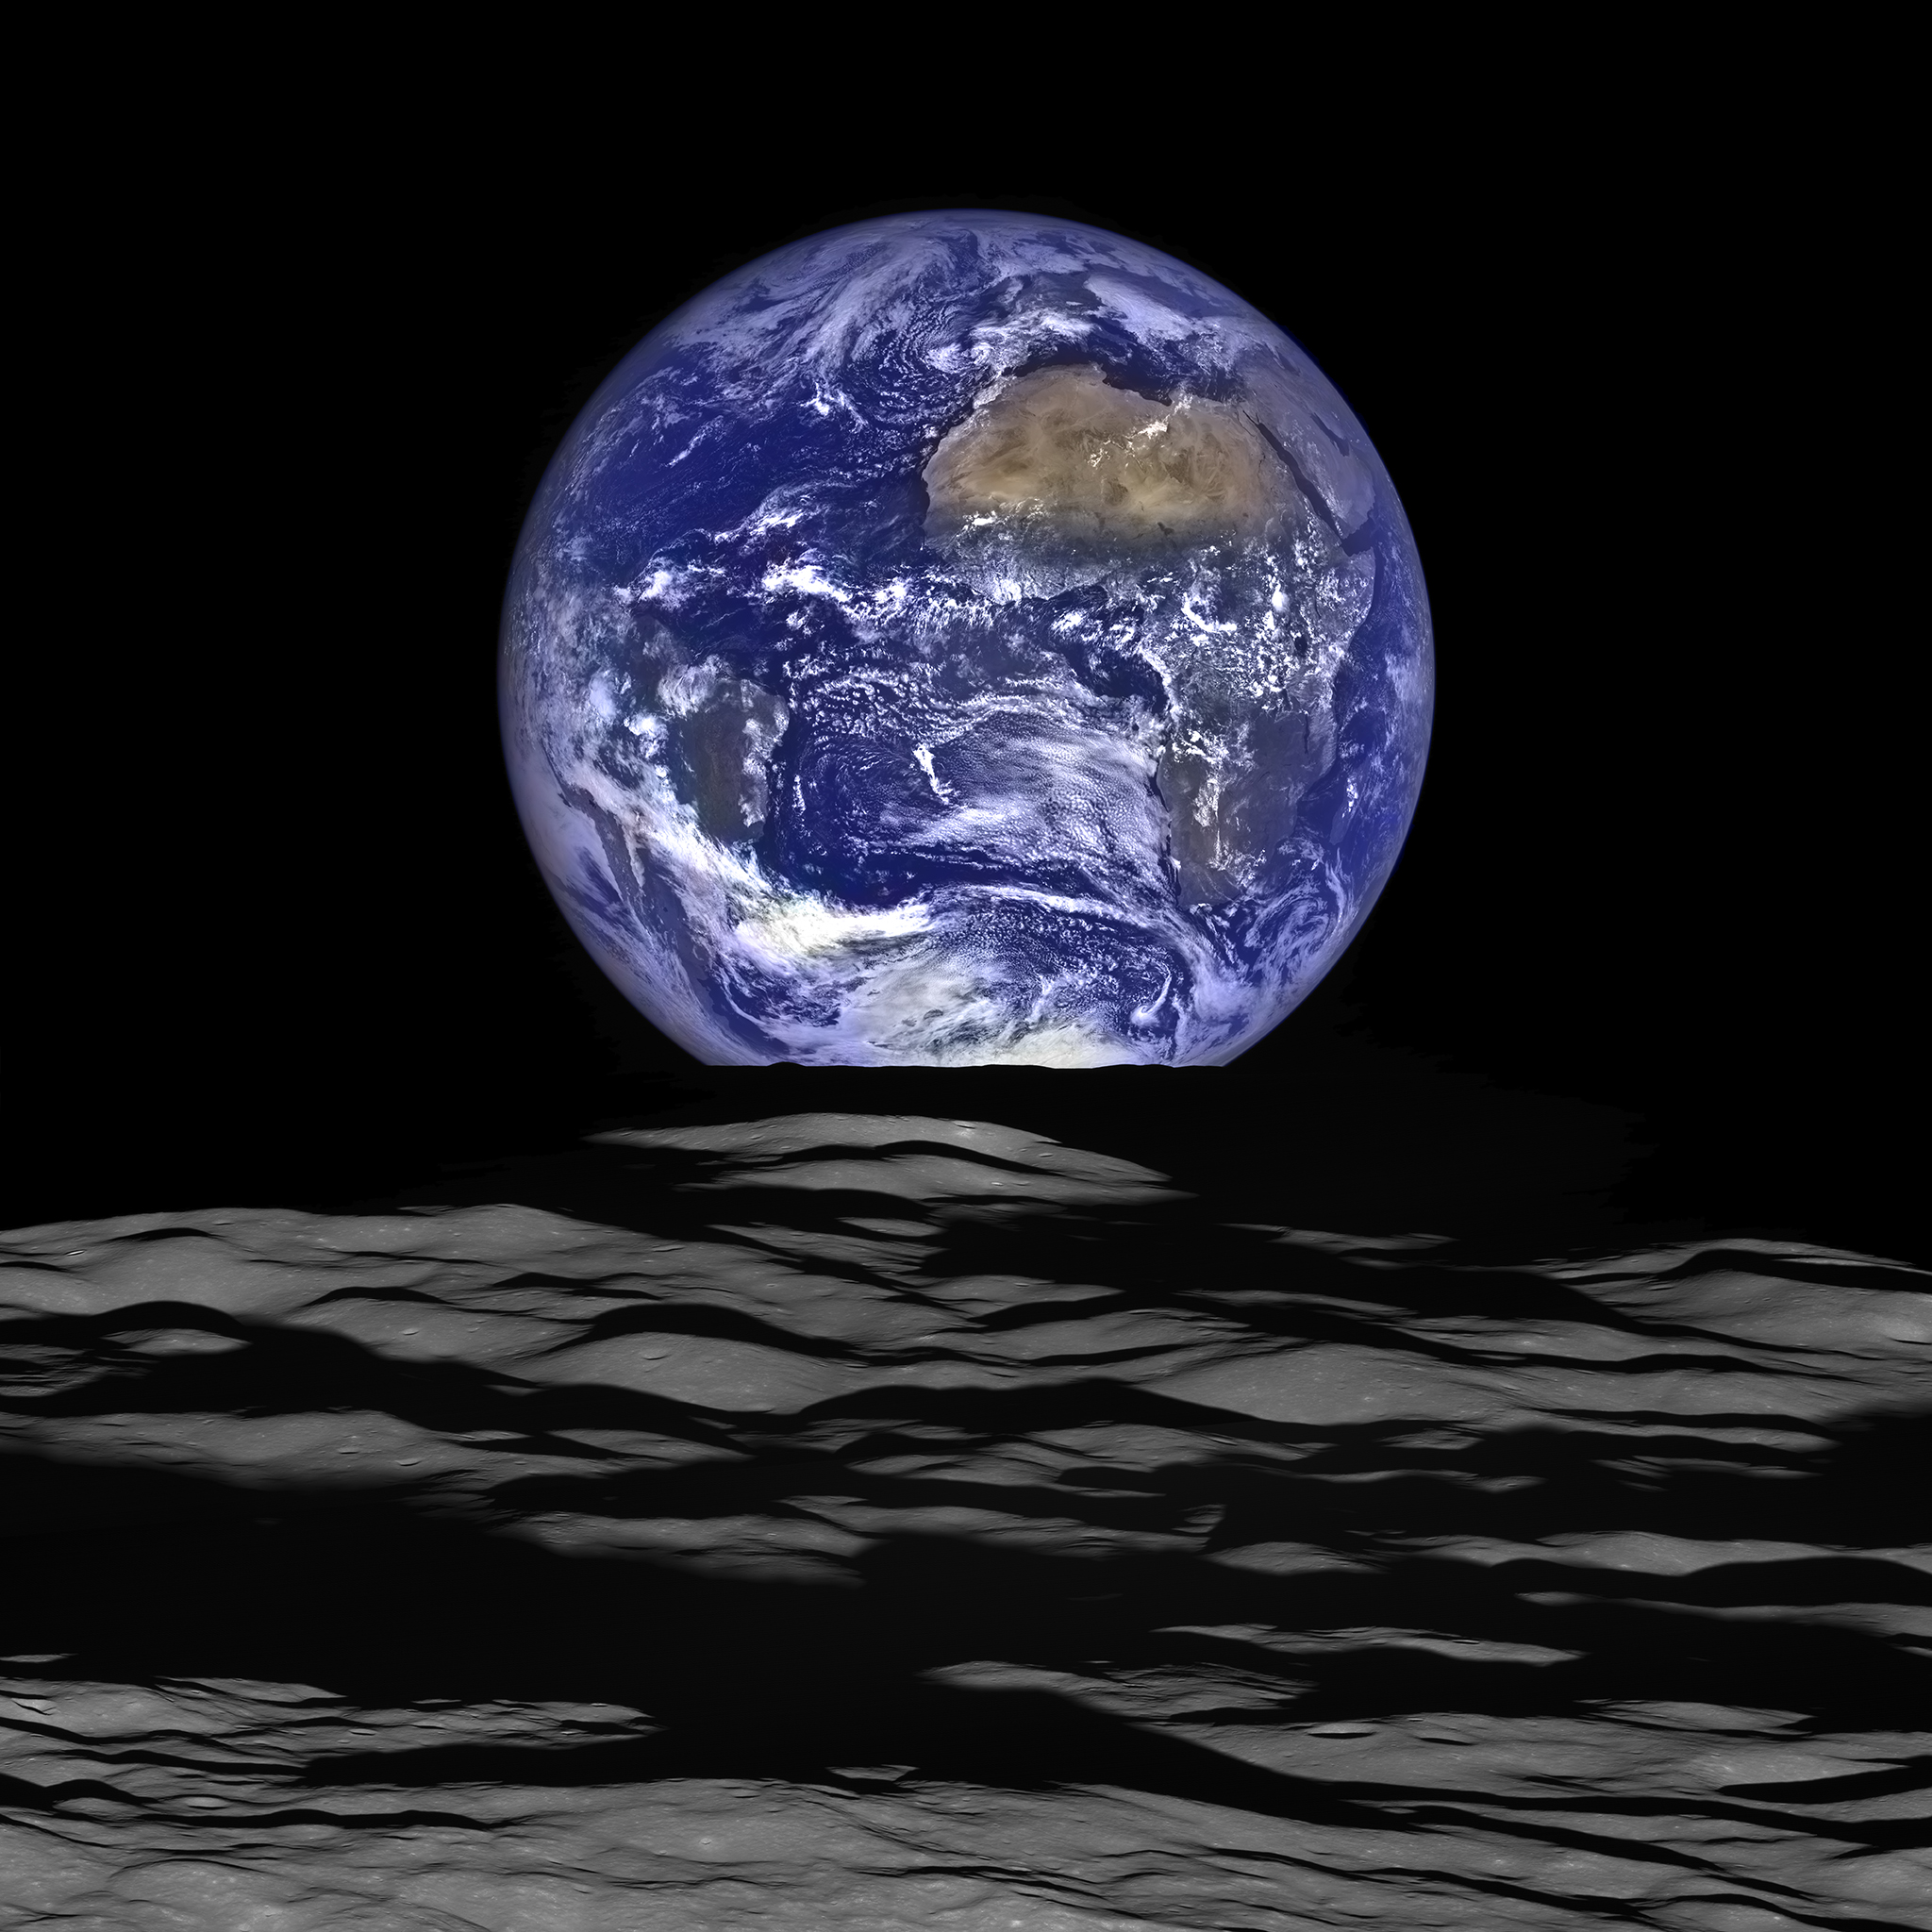 NASA's Lunar Reconnaissance Orbiter (LRO) recently captured a unique view of Earth from the spacecraft's vantage point in orbit around the moon.